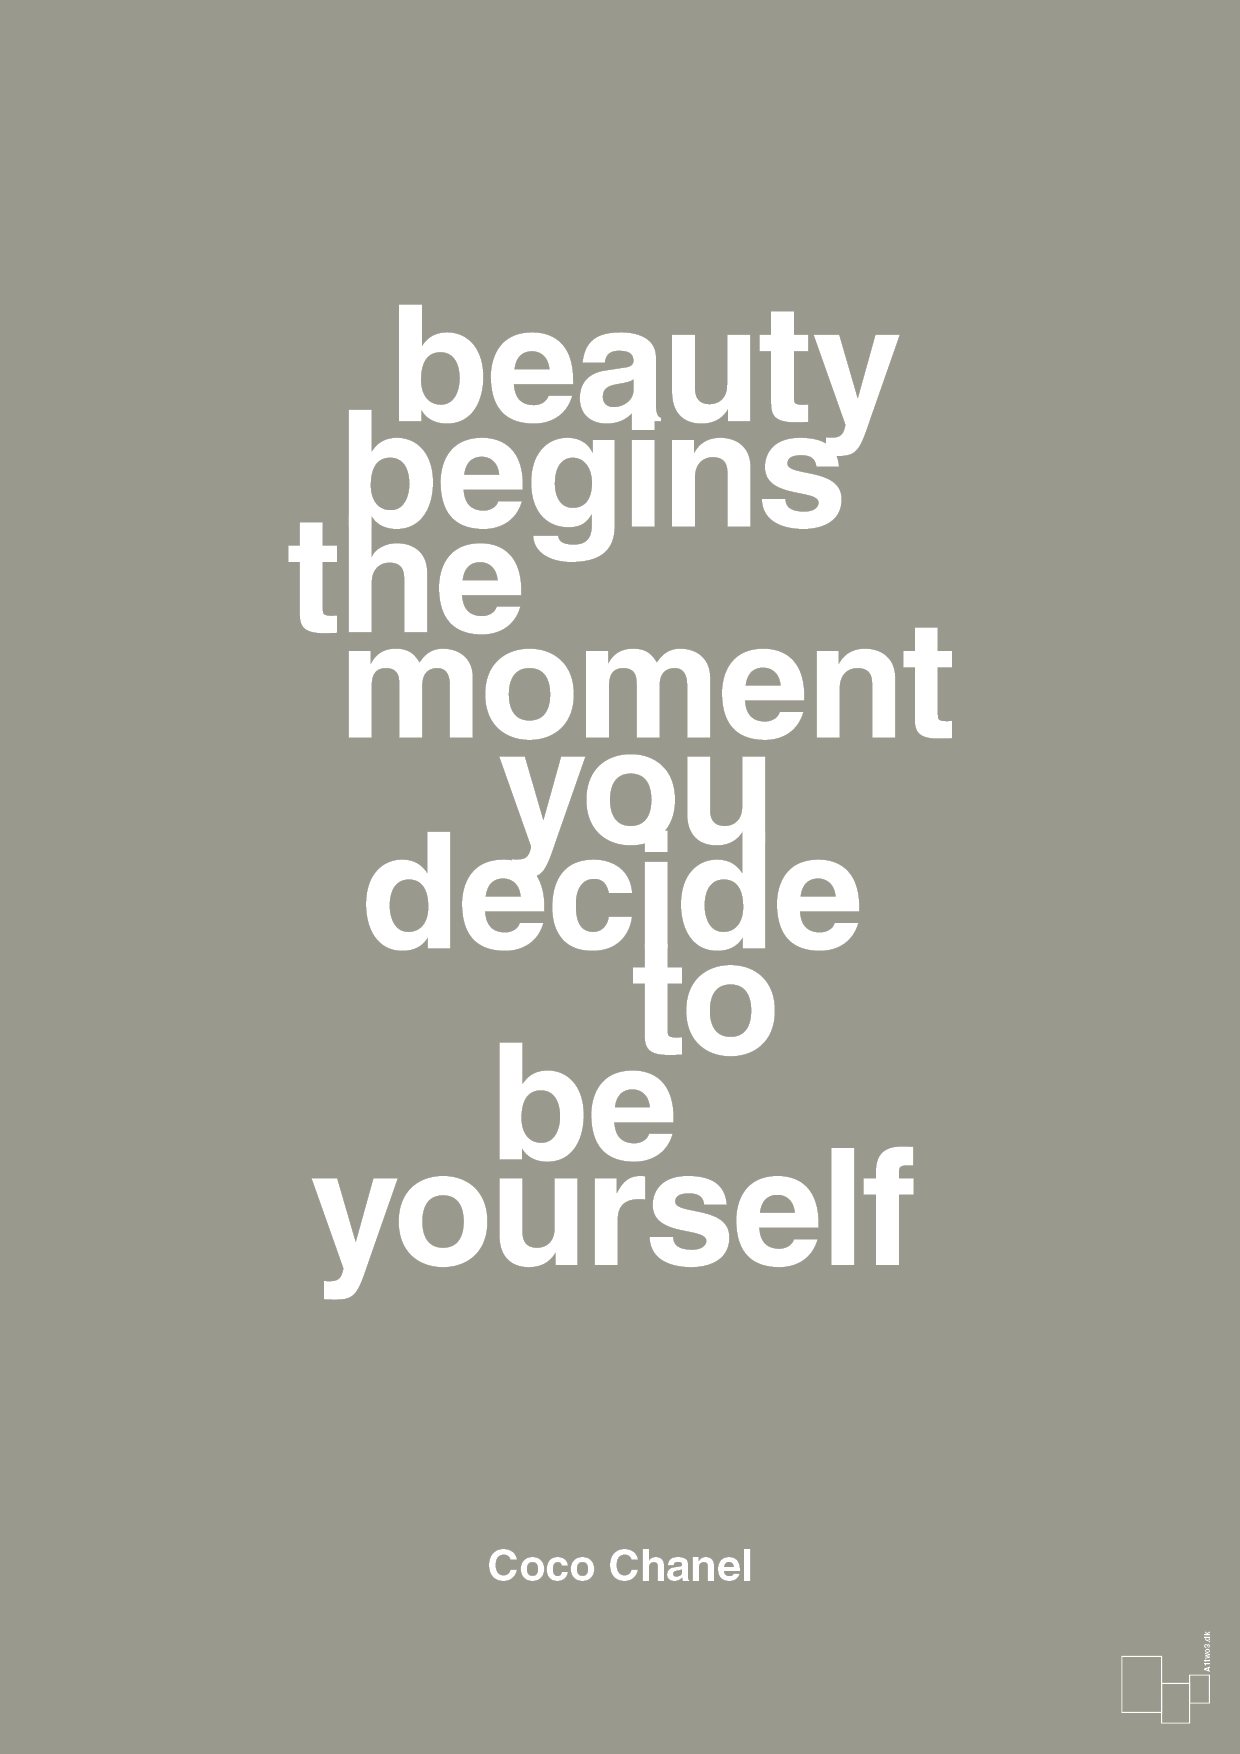 beauty begins the moment you decide to be yourself - Plakat med Citater i Battleship Gray